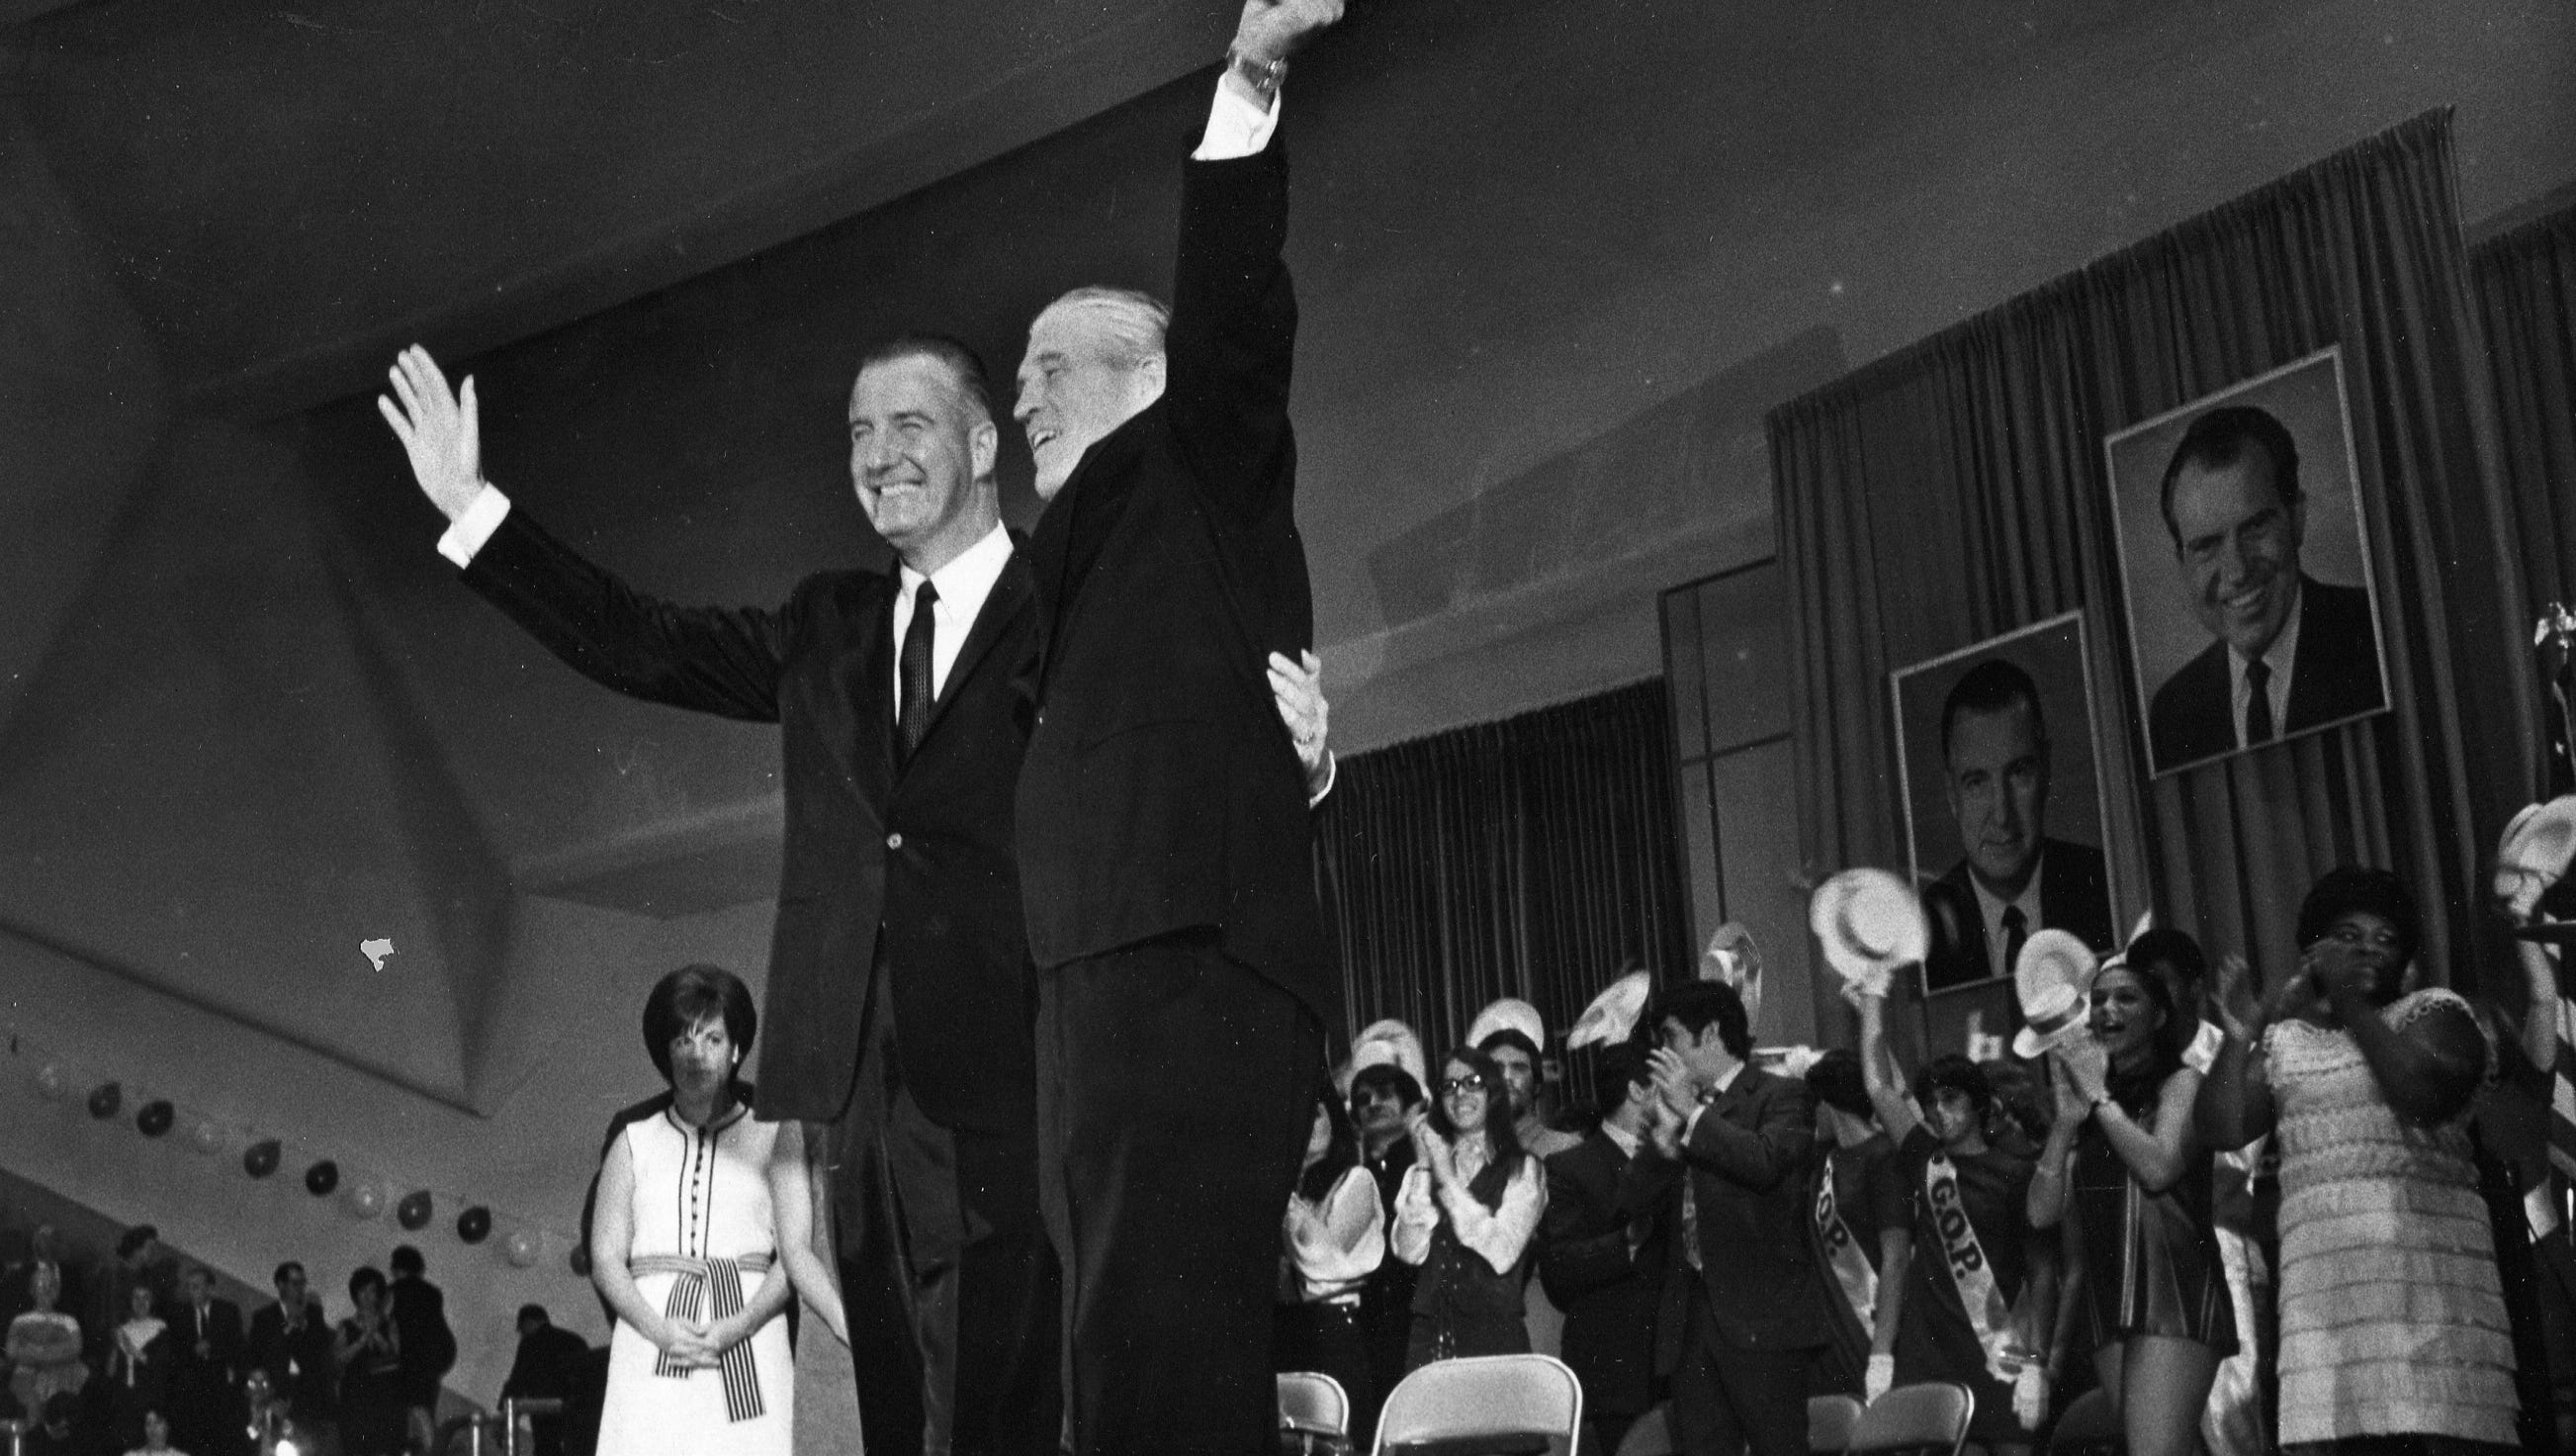 Vice President Spiro T. Agnew, left, appears with Michigan Gov. George Romney at Cobo on Oct. 18, 1968.